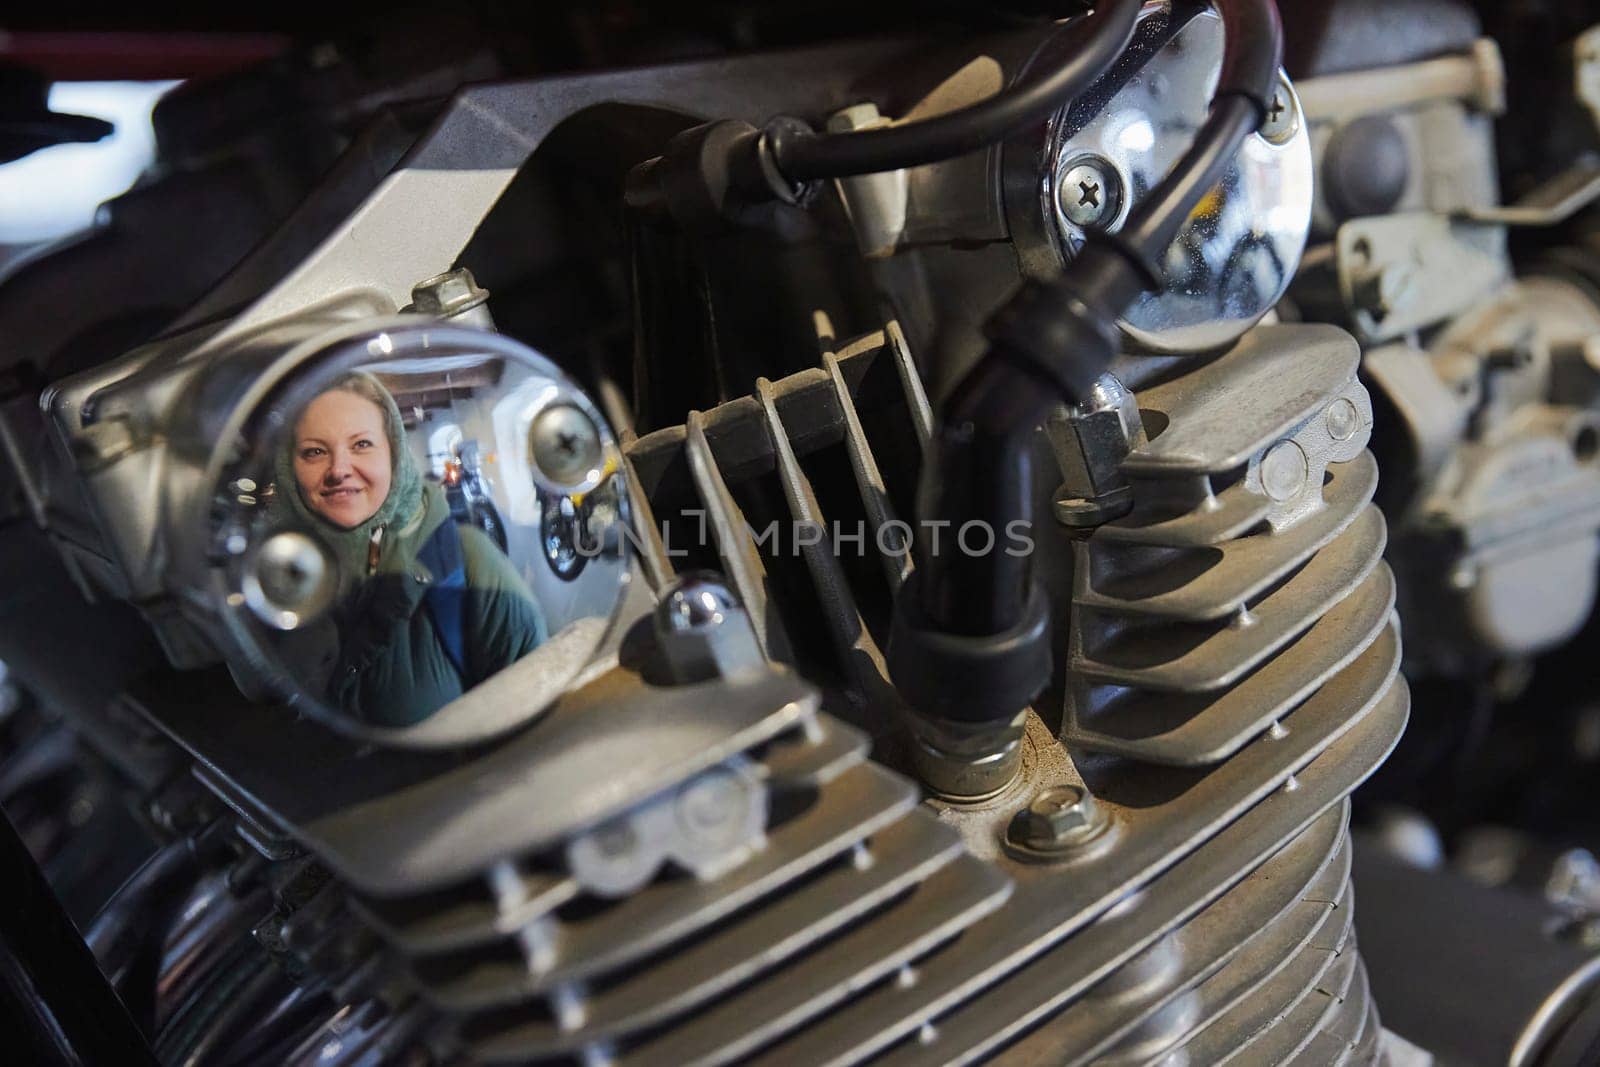 A visitor is reflected in the engine of a vintage motorcycle in Denmark